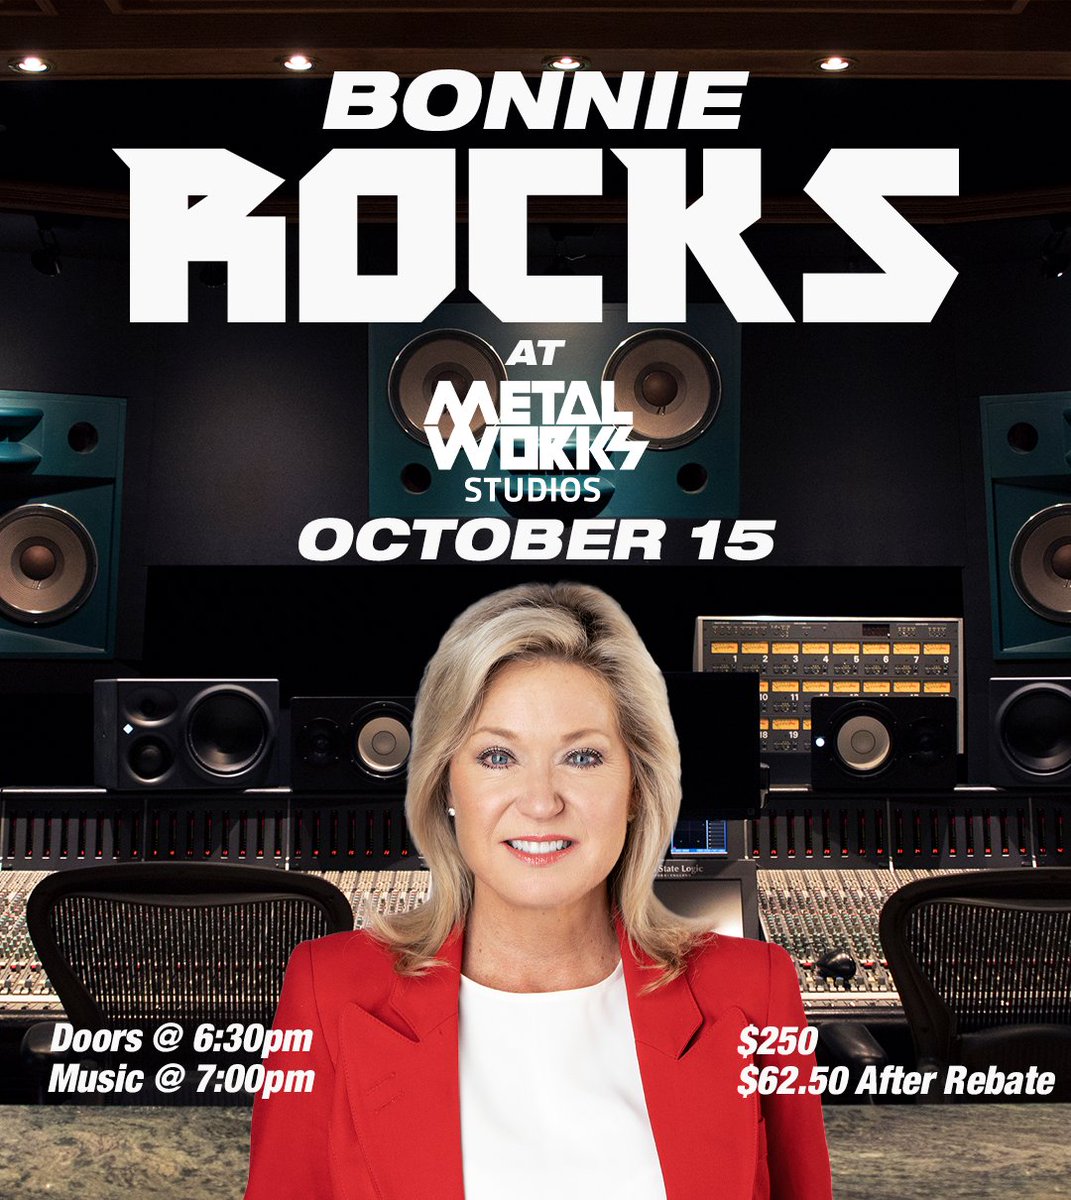 Bonnie Rocks at Metalworks Studios! Join Bonnie and her supporters at Metalworks Studios on October 15 for an all-access backstage pass tour of the famed Metal Works Studios. Refreshments will be served. Doors open at 6:30 - Live music at 7pm bonniecrombie.ca/metal_works